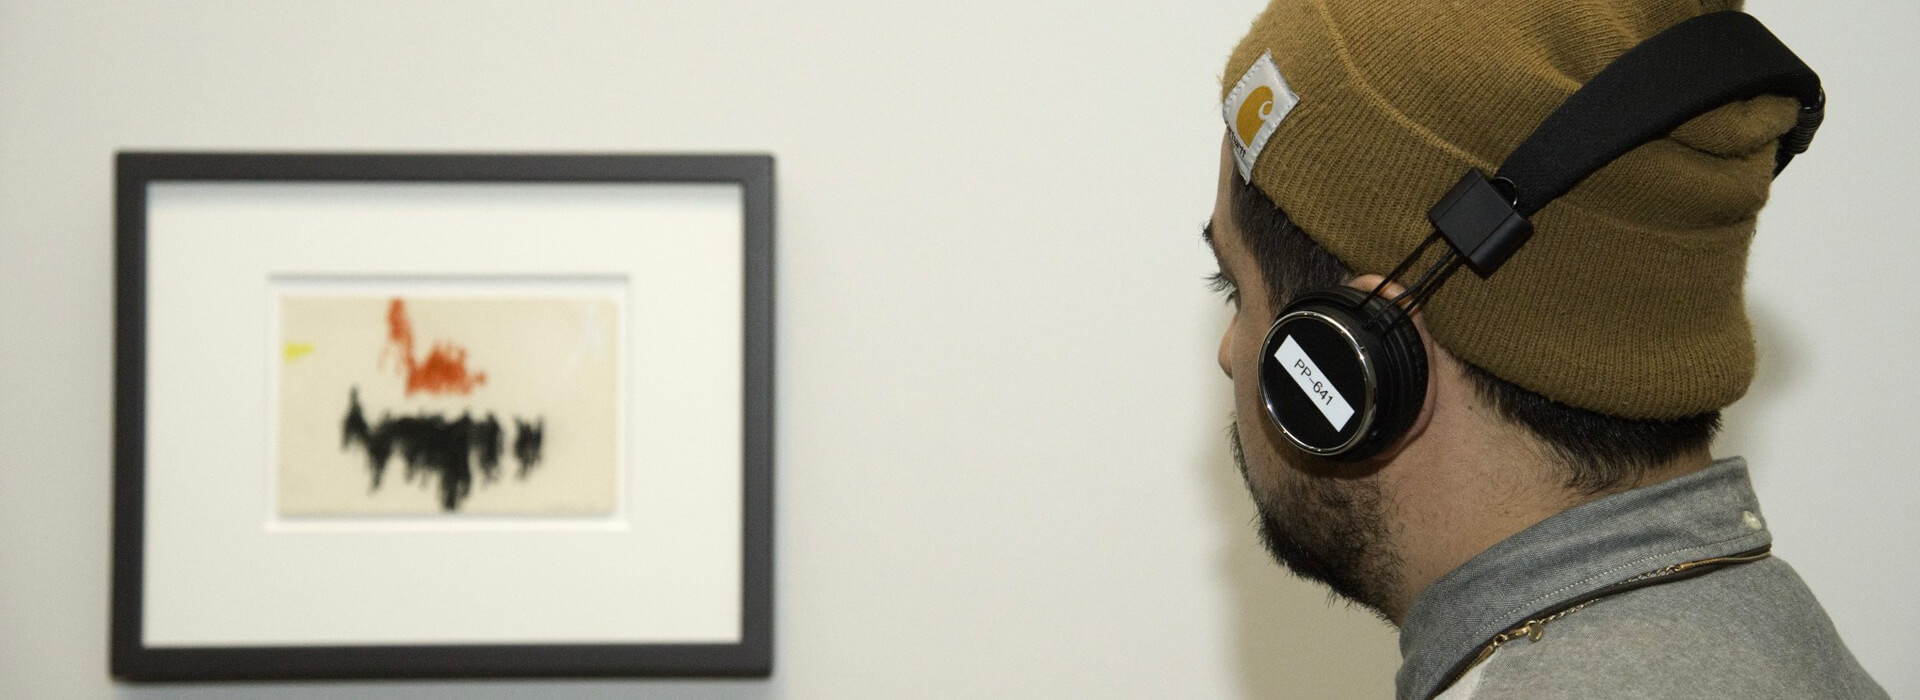 Man wearing headphones and a hat looks at a small framed artwork